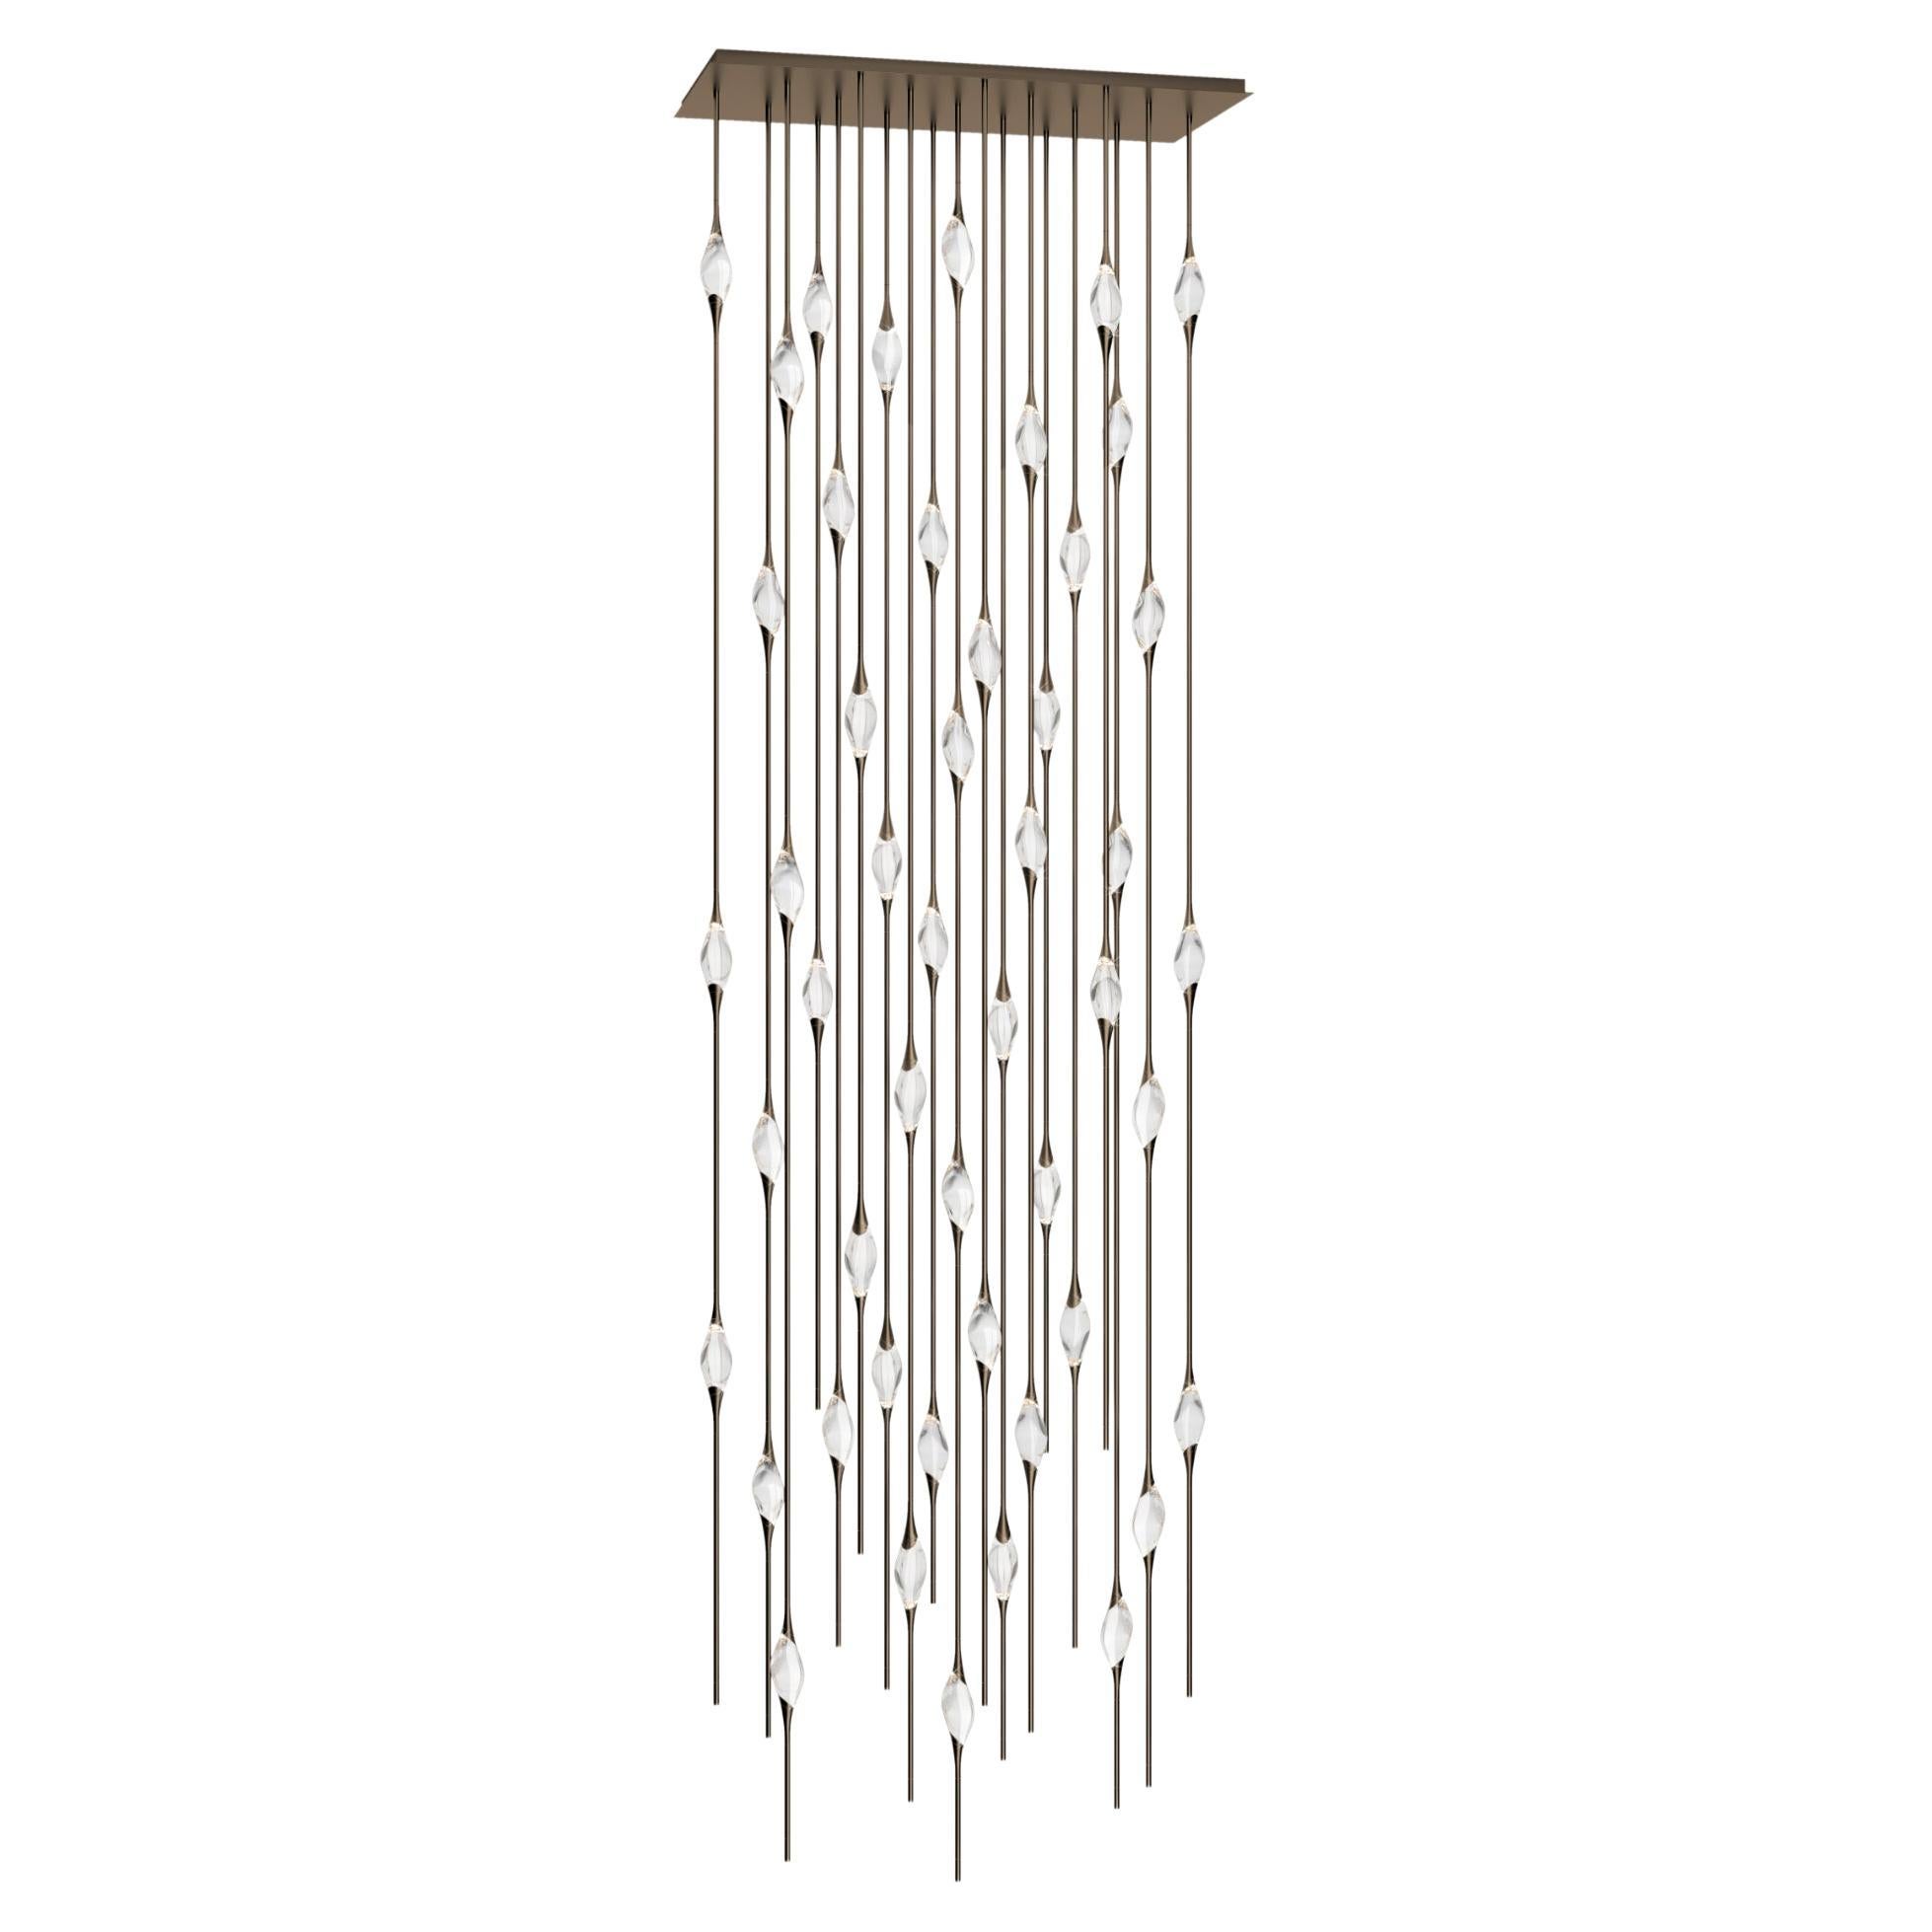 "Il Pezzo 12 Cluster Chandelier" - height 500cm/197" - bronze - crystal - LEDs For Sale